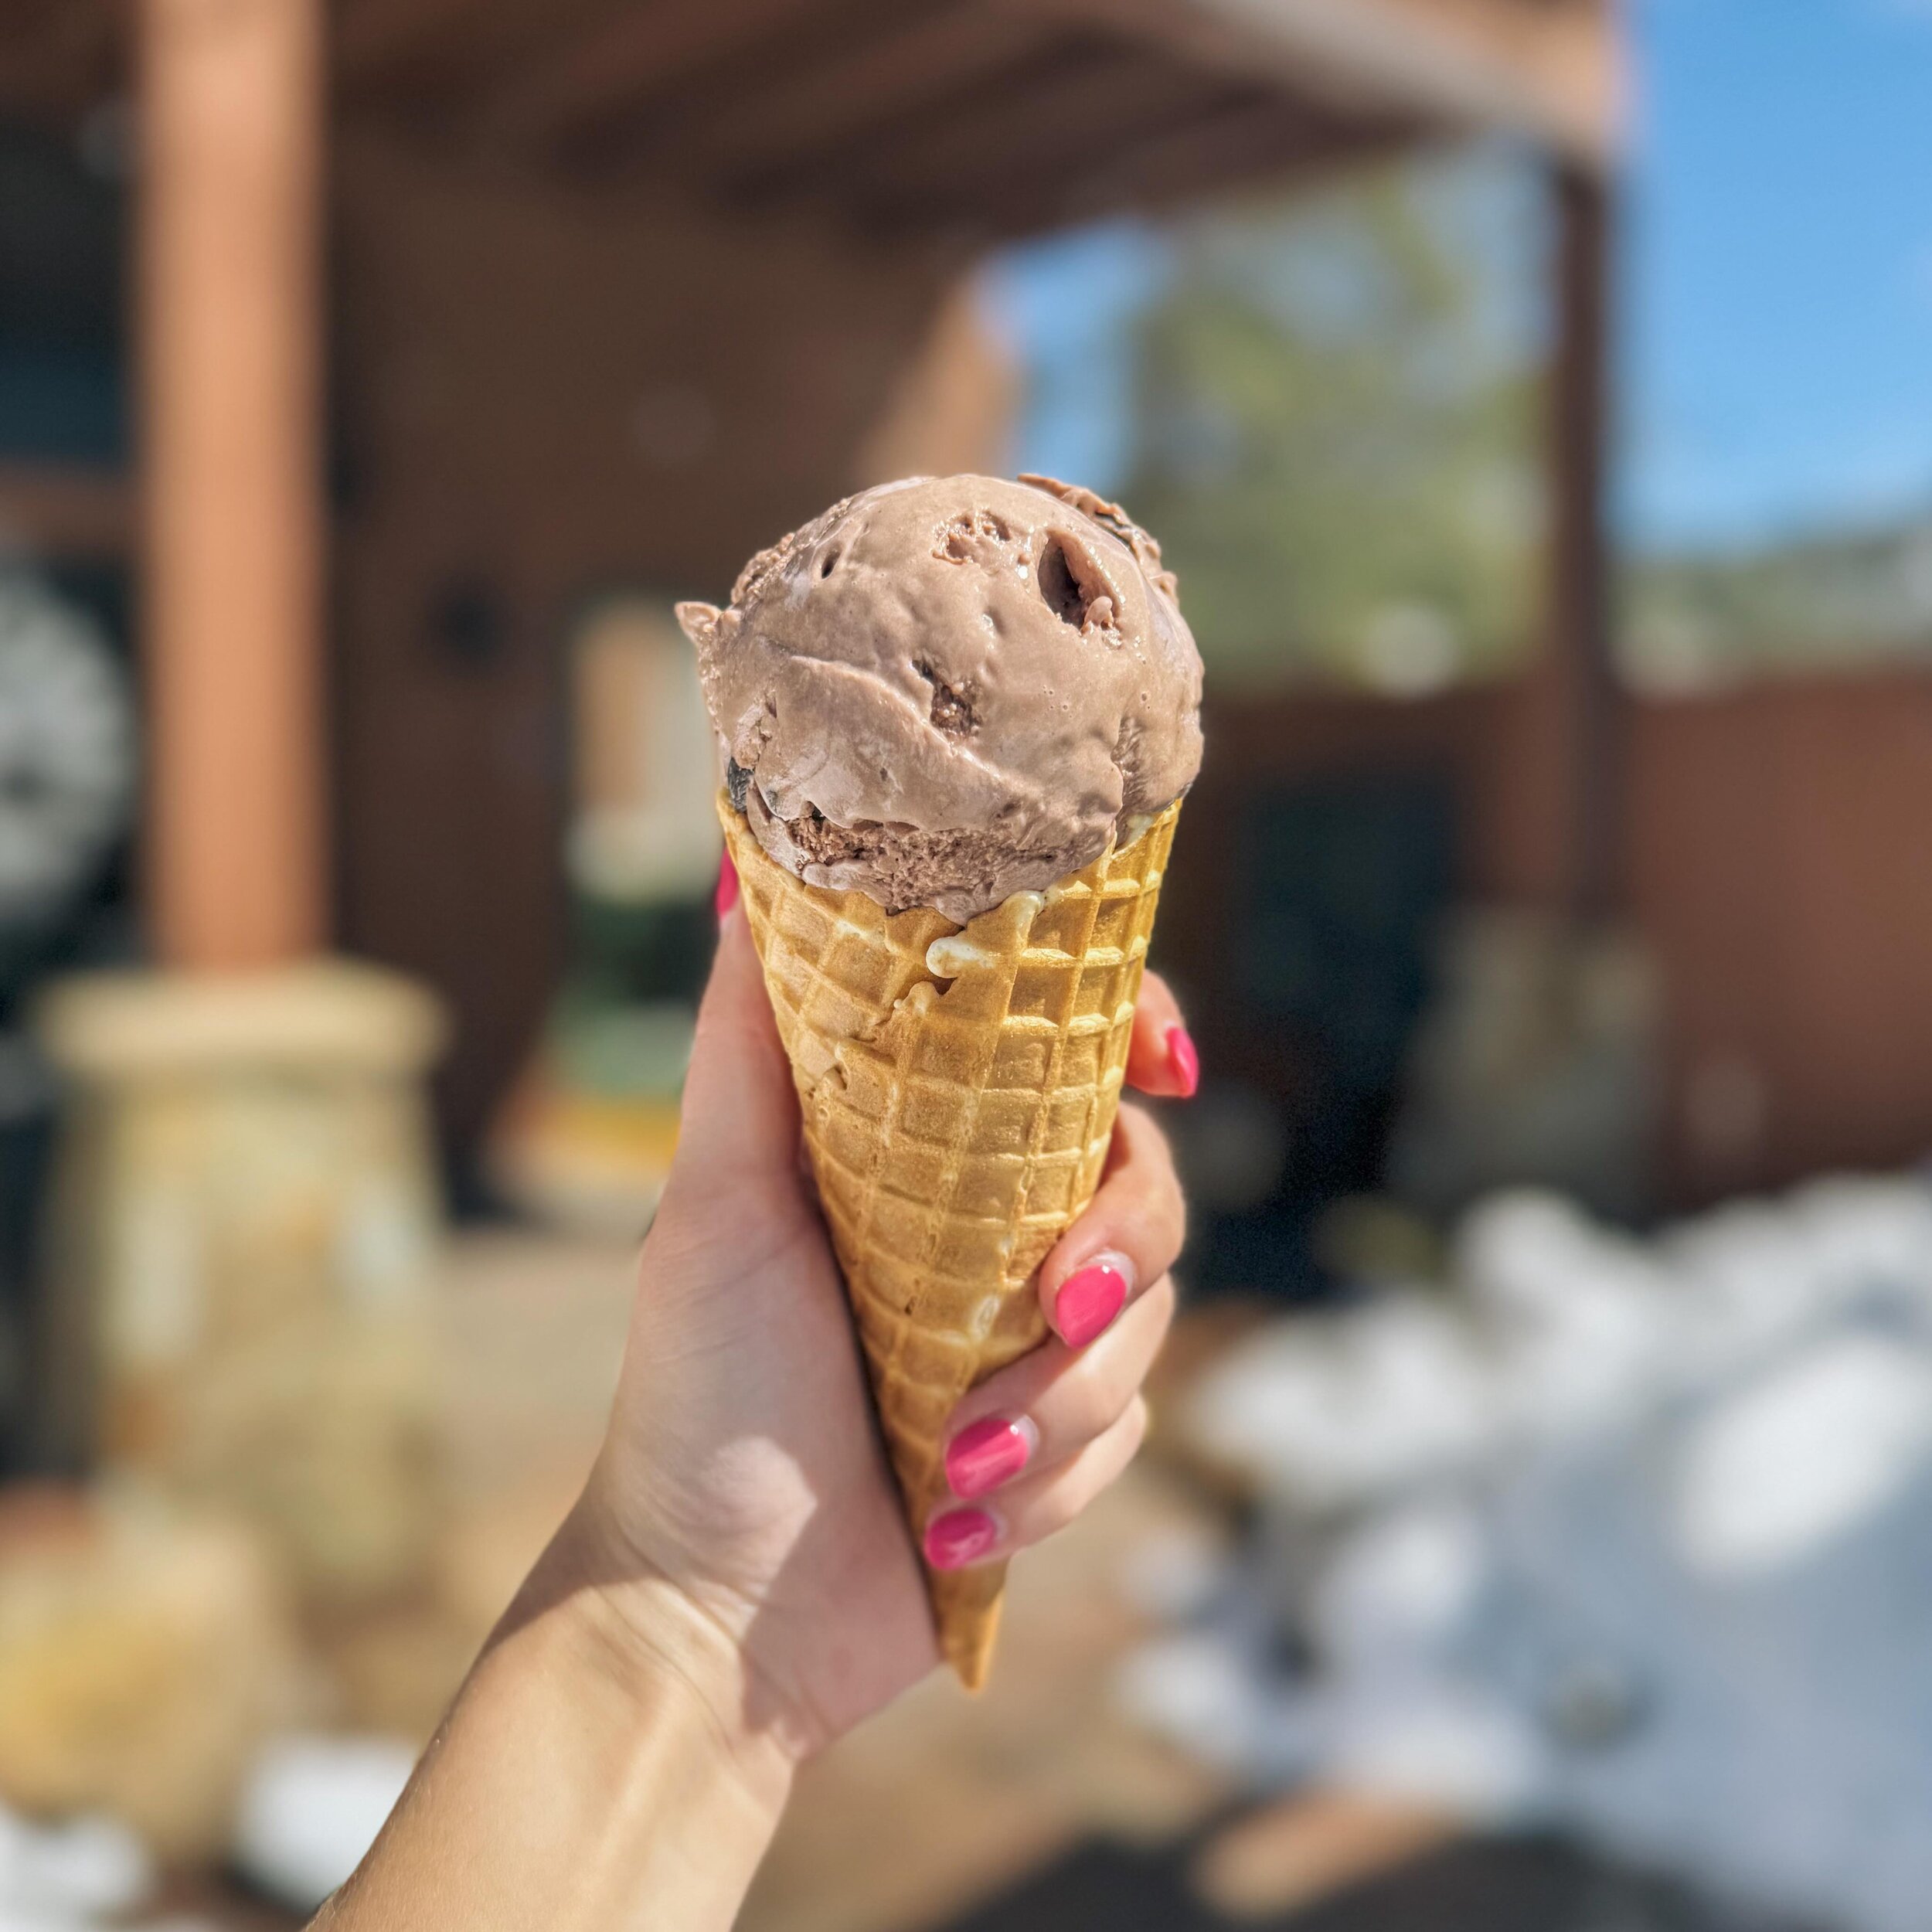 ✨ Chocolate Raspberry ✨

A brand new flavor here for a very limited time! Chocolate + raspberry base with plenty of raspberry filled chocolate chips mixed in!

The sun is shining + we are scooping! 🌞